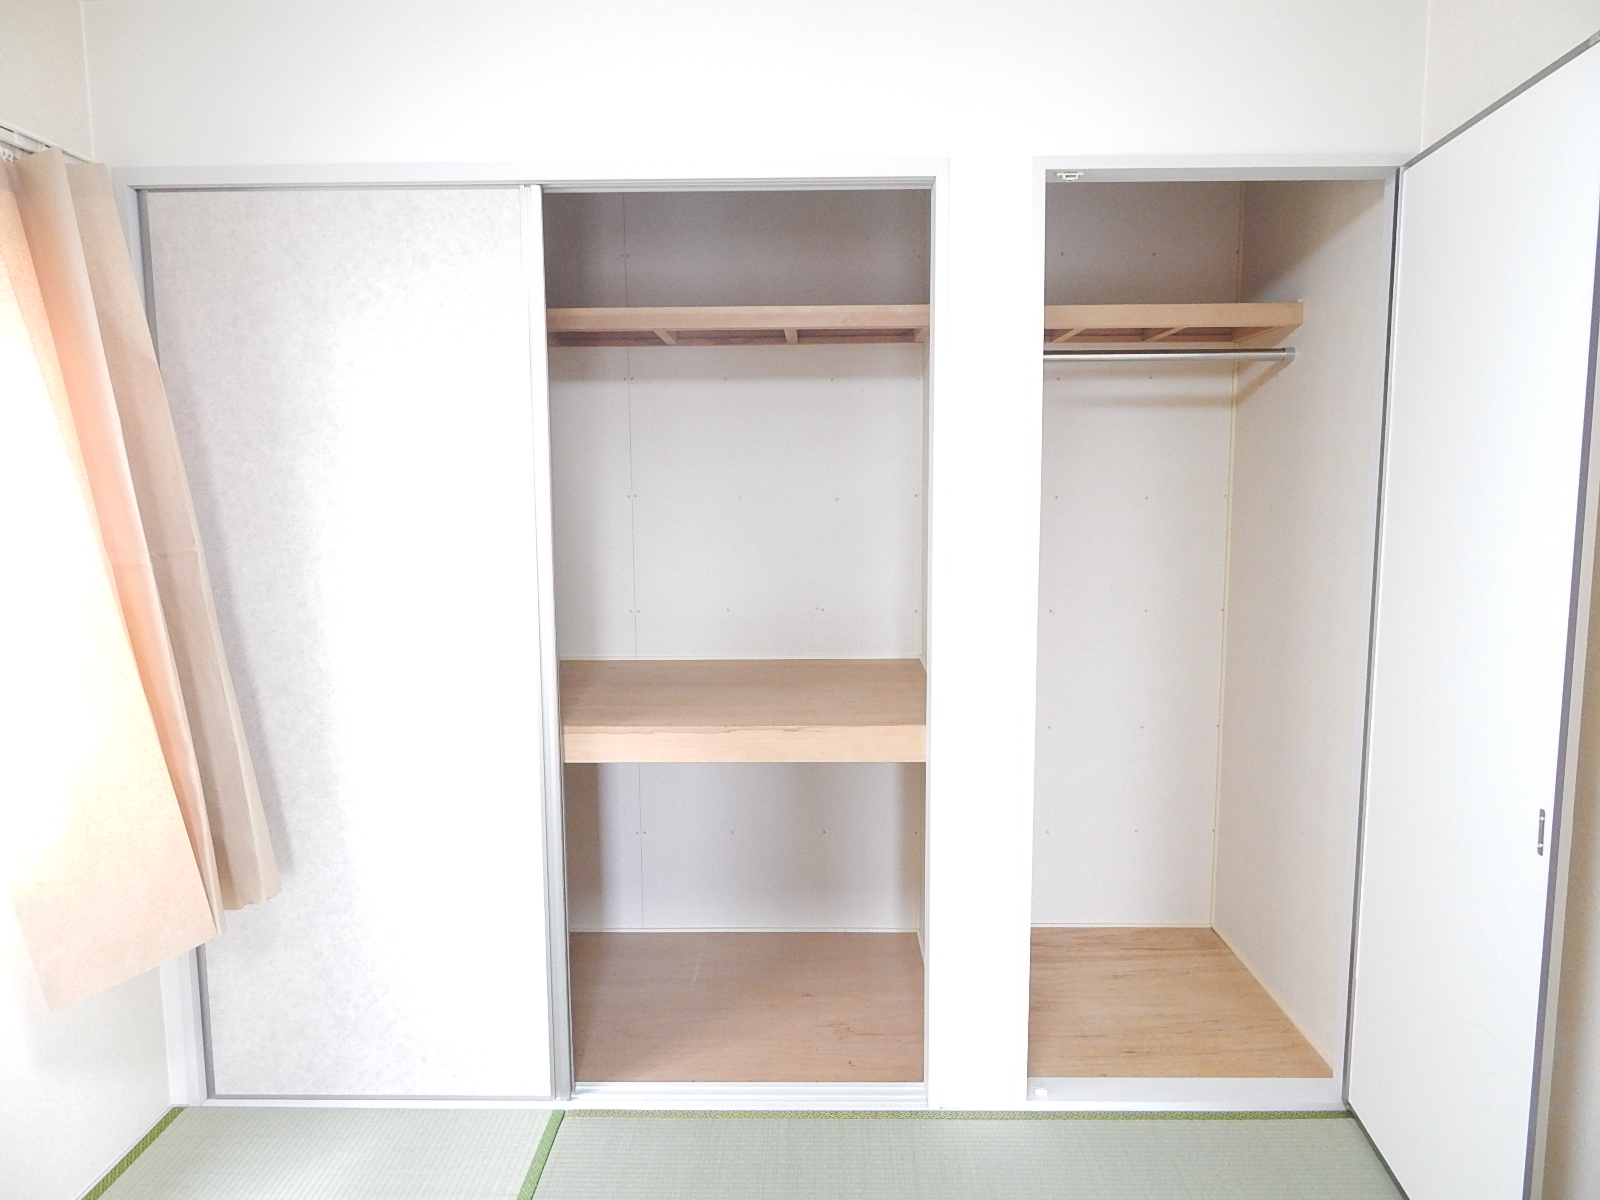 Other room space. Happy In the Japanese-style room, It is closet space